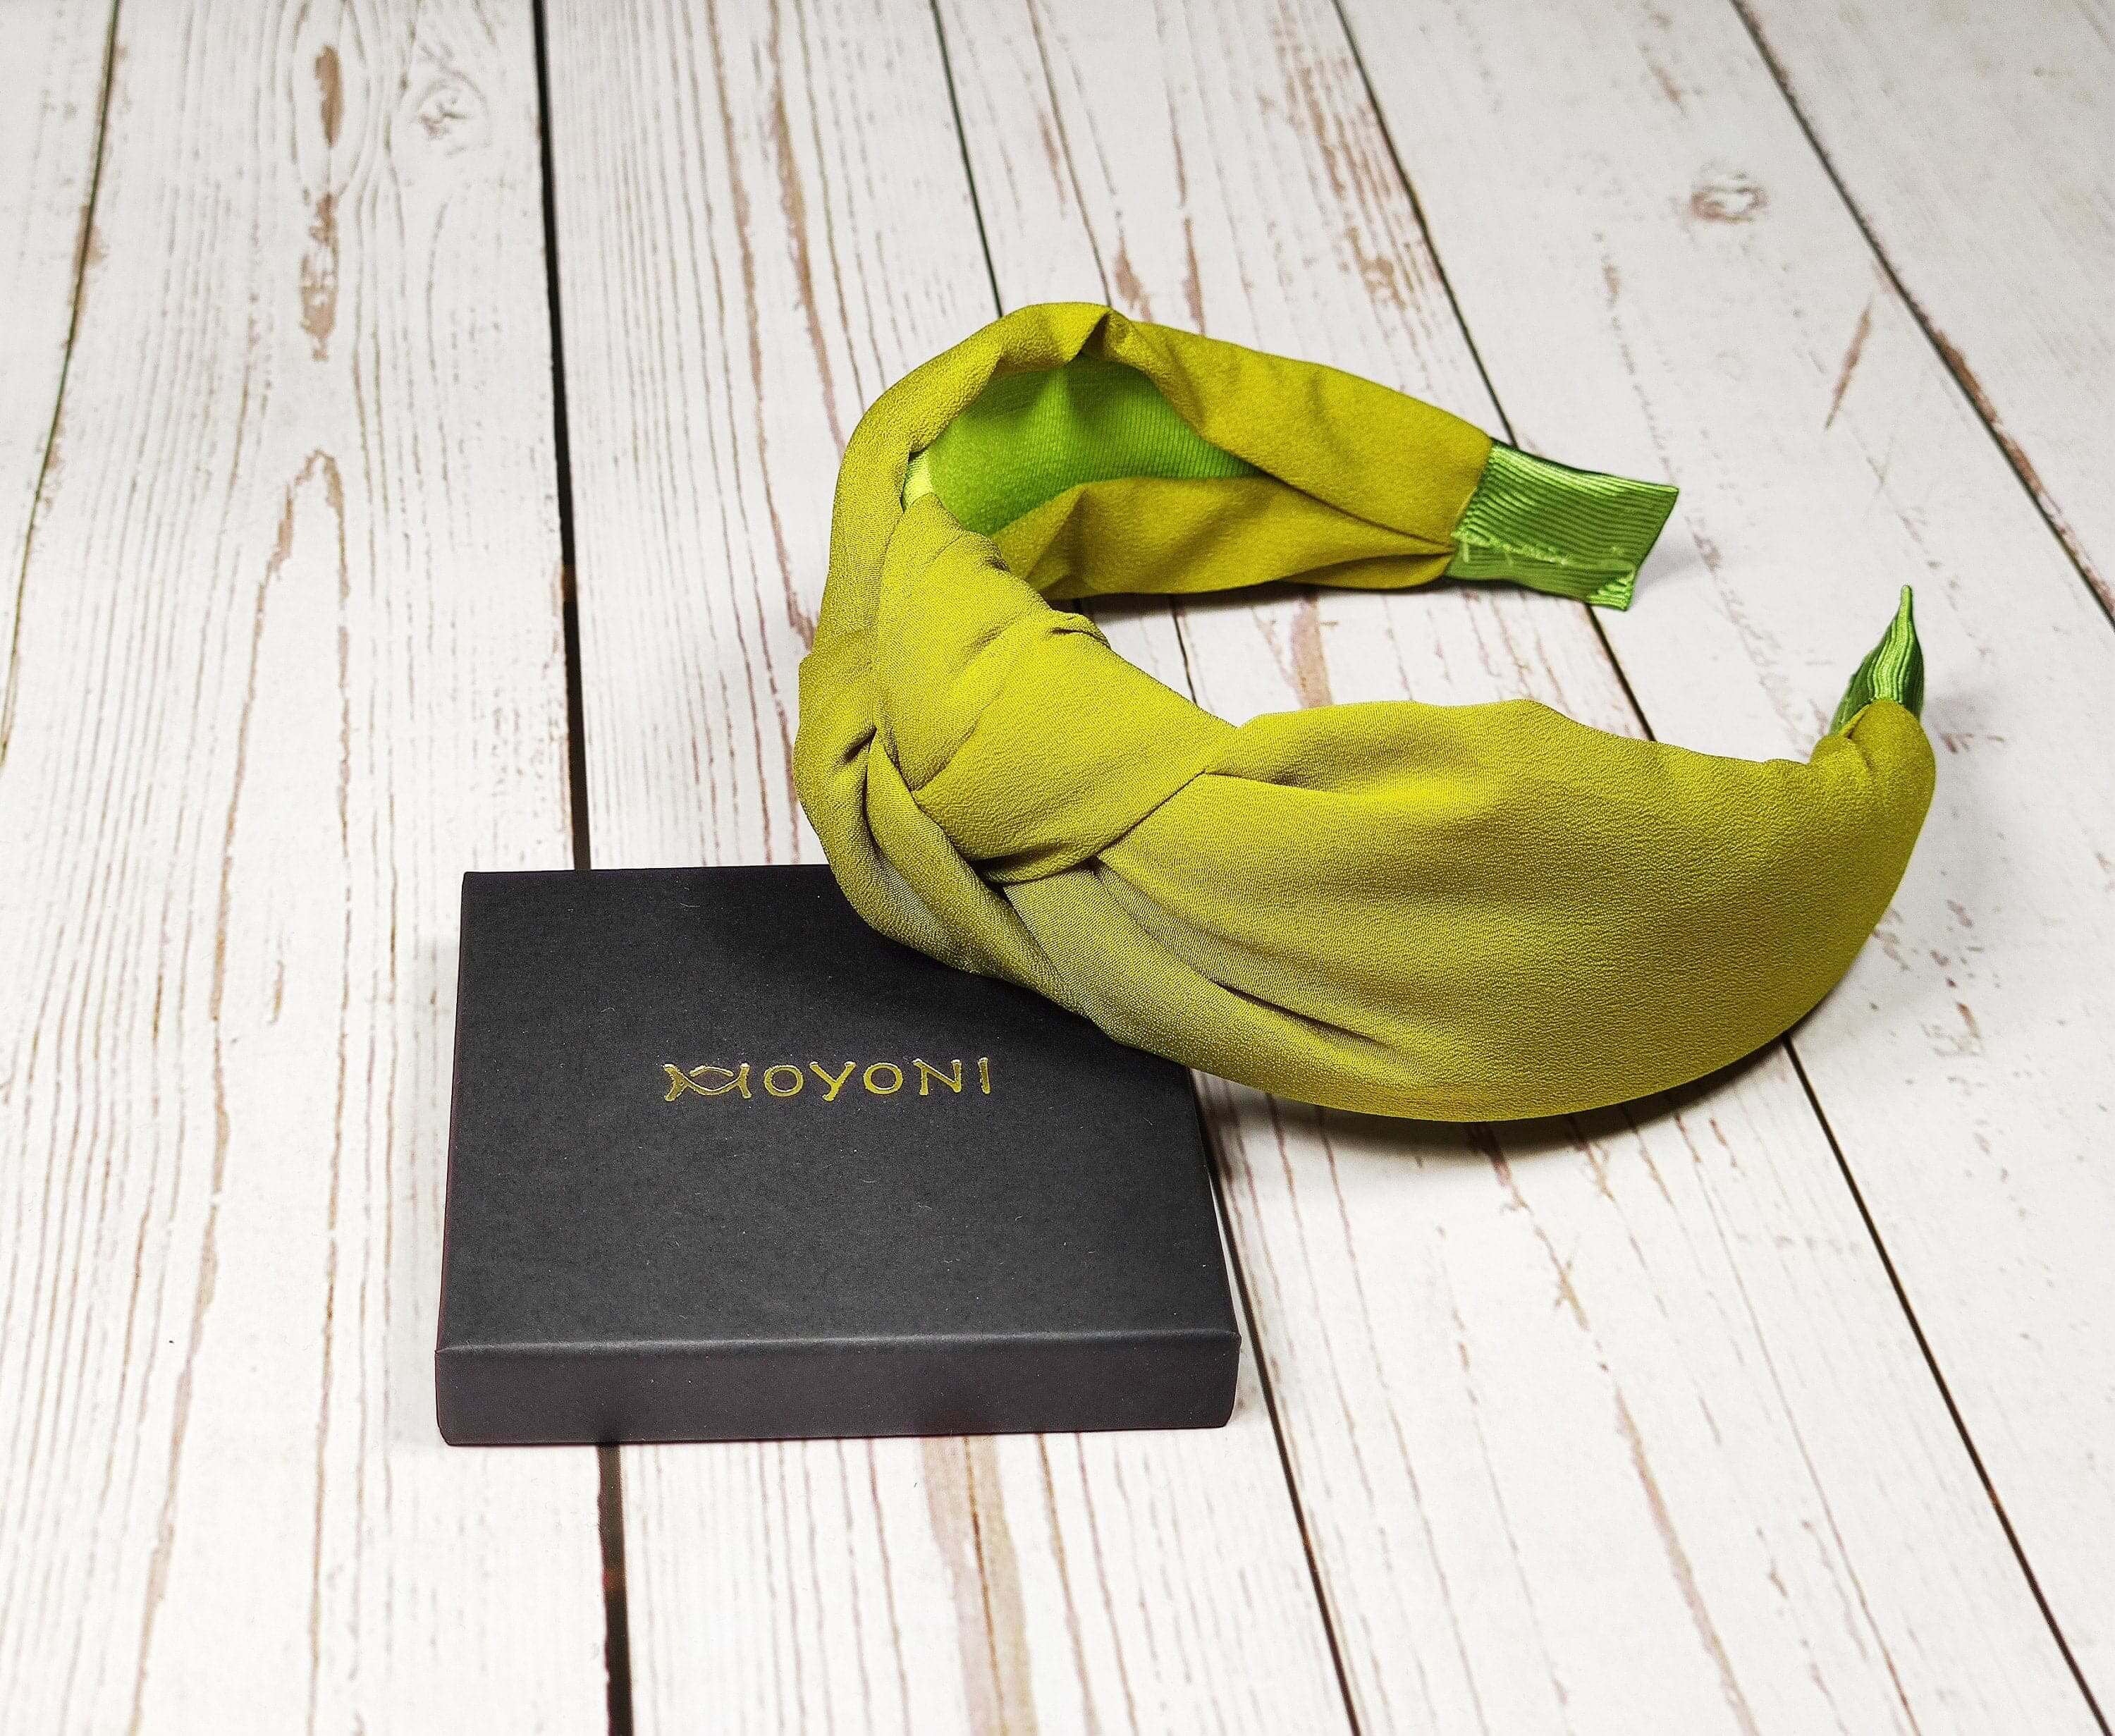 A stylish, lightweight, and versatile headband perfect for summer. Check out this lime green twist headband that is perfect for a summer day!